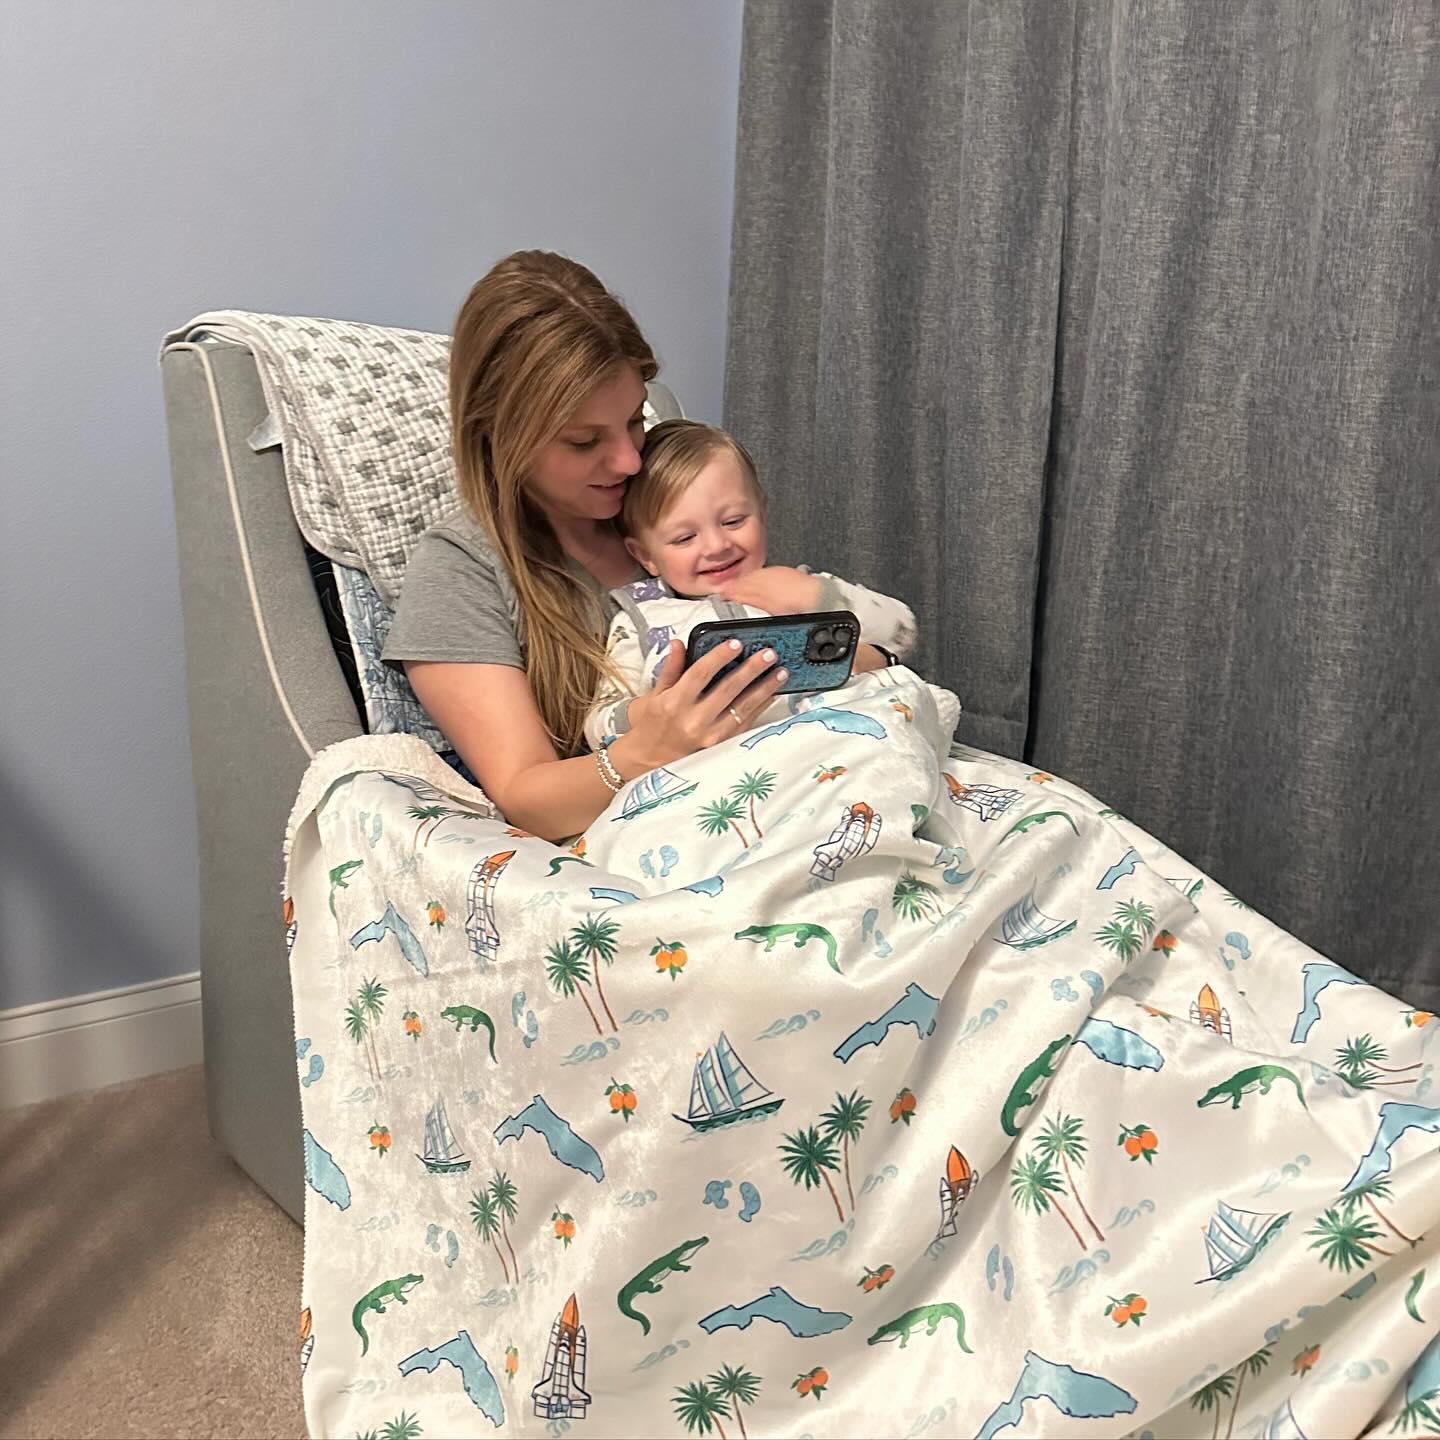 A mom and smiling child cuddling under a Florida-themed plush throw blanket, 60x80 inches, featuring vibrant tropical designs, oranges, alligators, manatees, palm trees, space shuttle, and other Florida elements